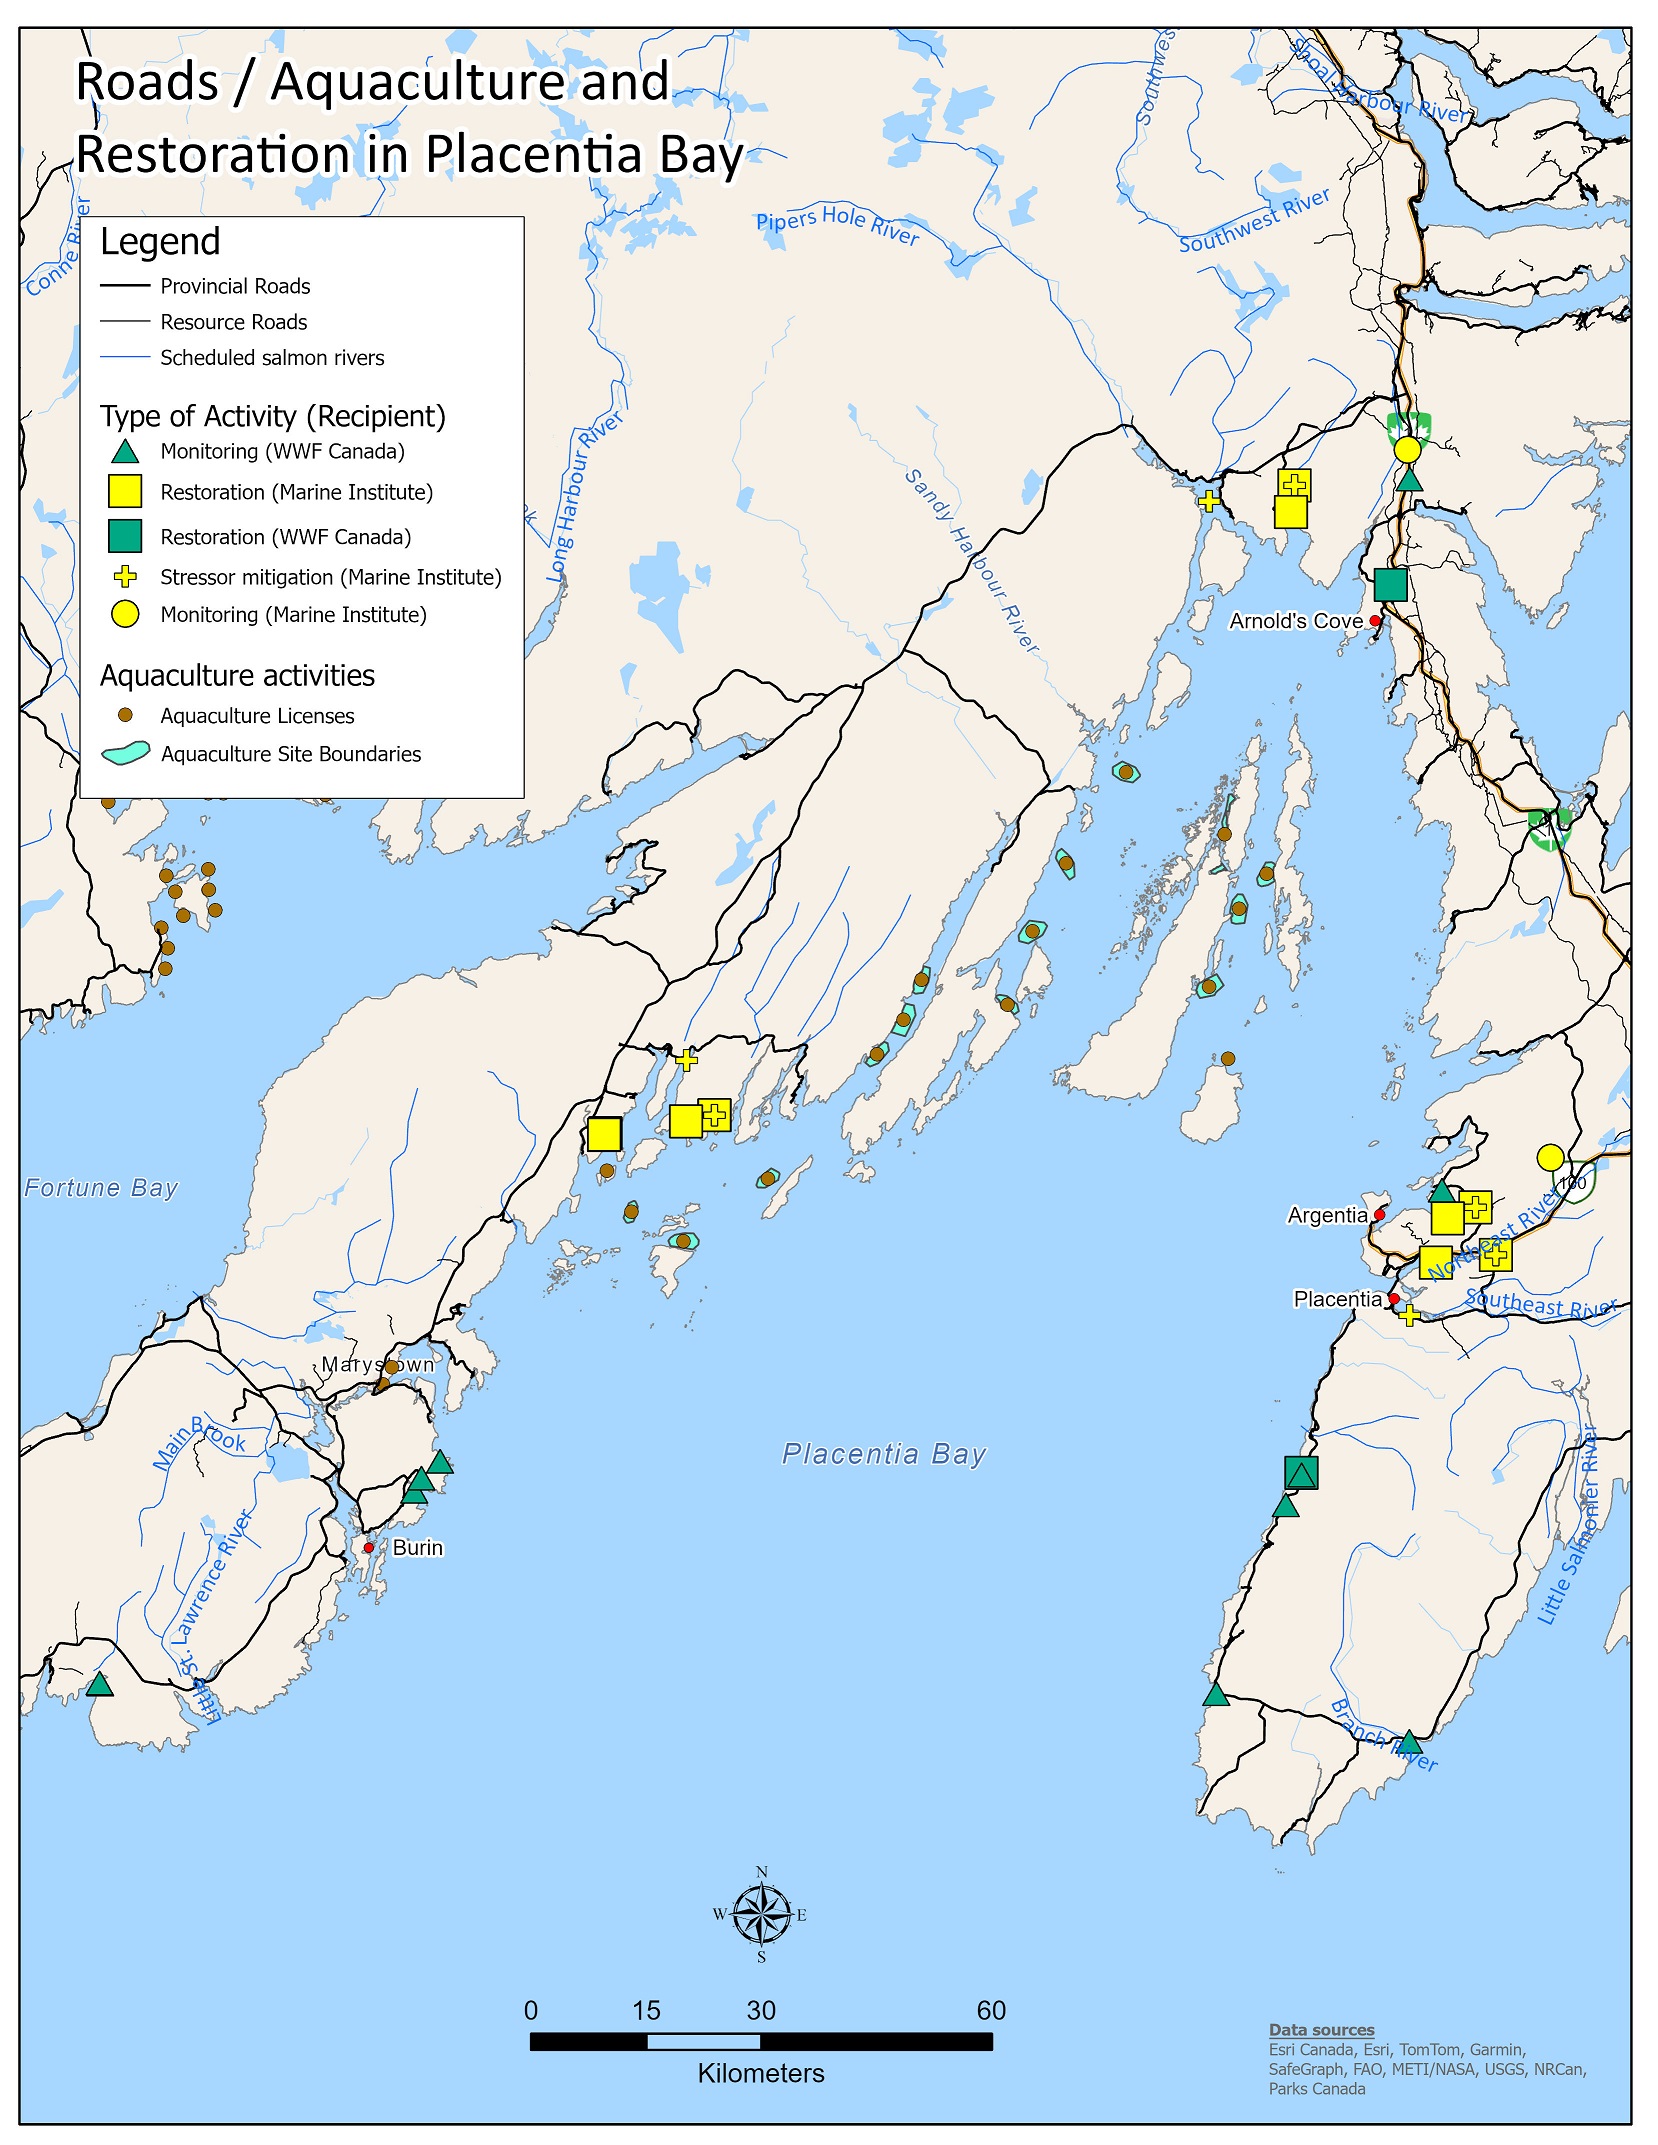 Map showing the physical locations of Coastal Restoration Fund projects in Placentia Bay in the context of human activities (e.g., Aquaculture and road networks)